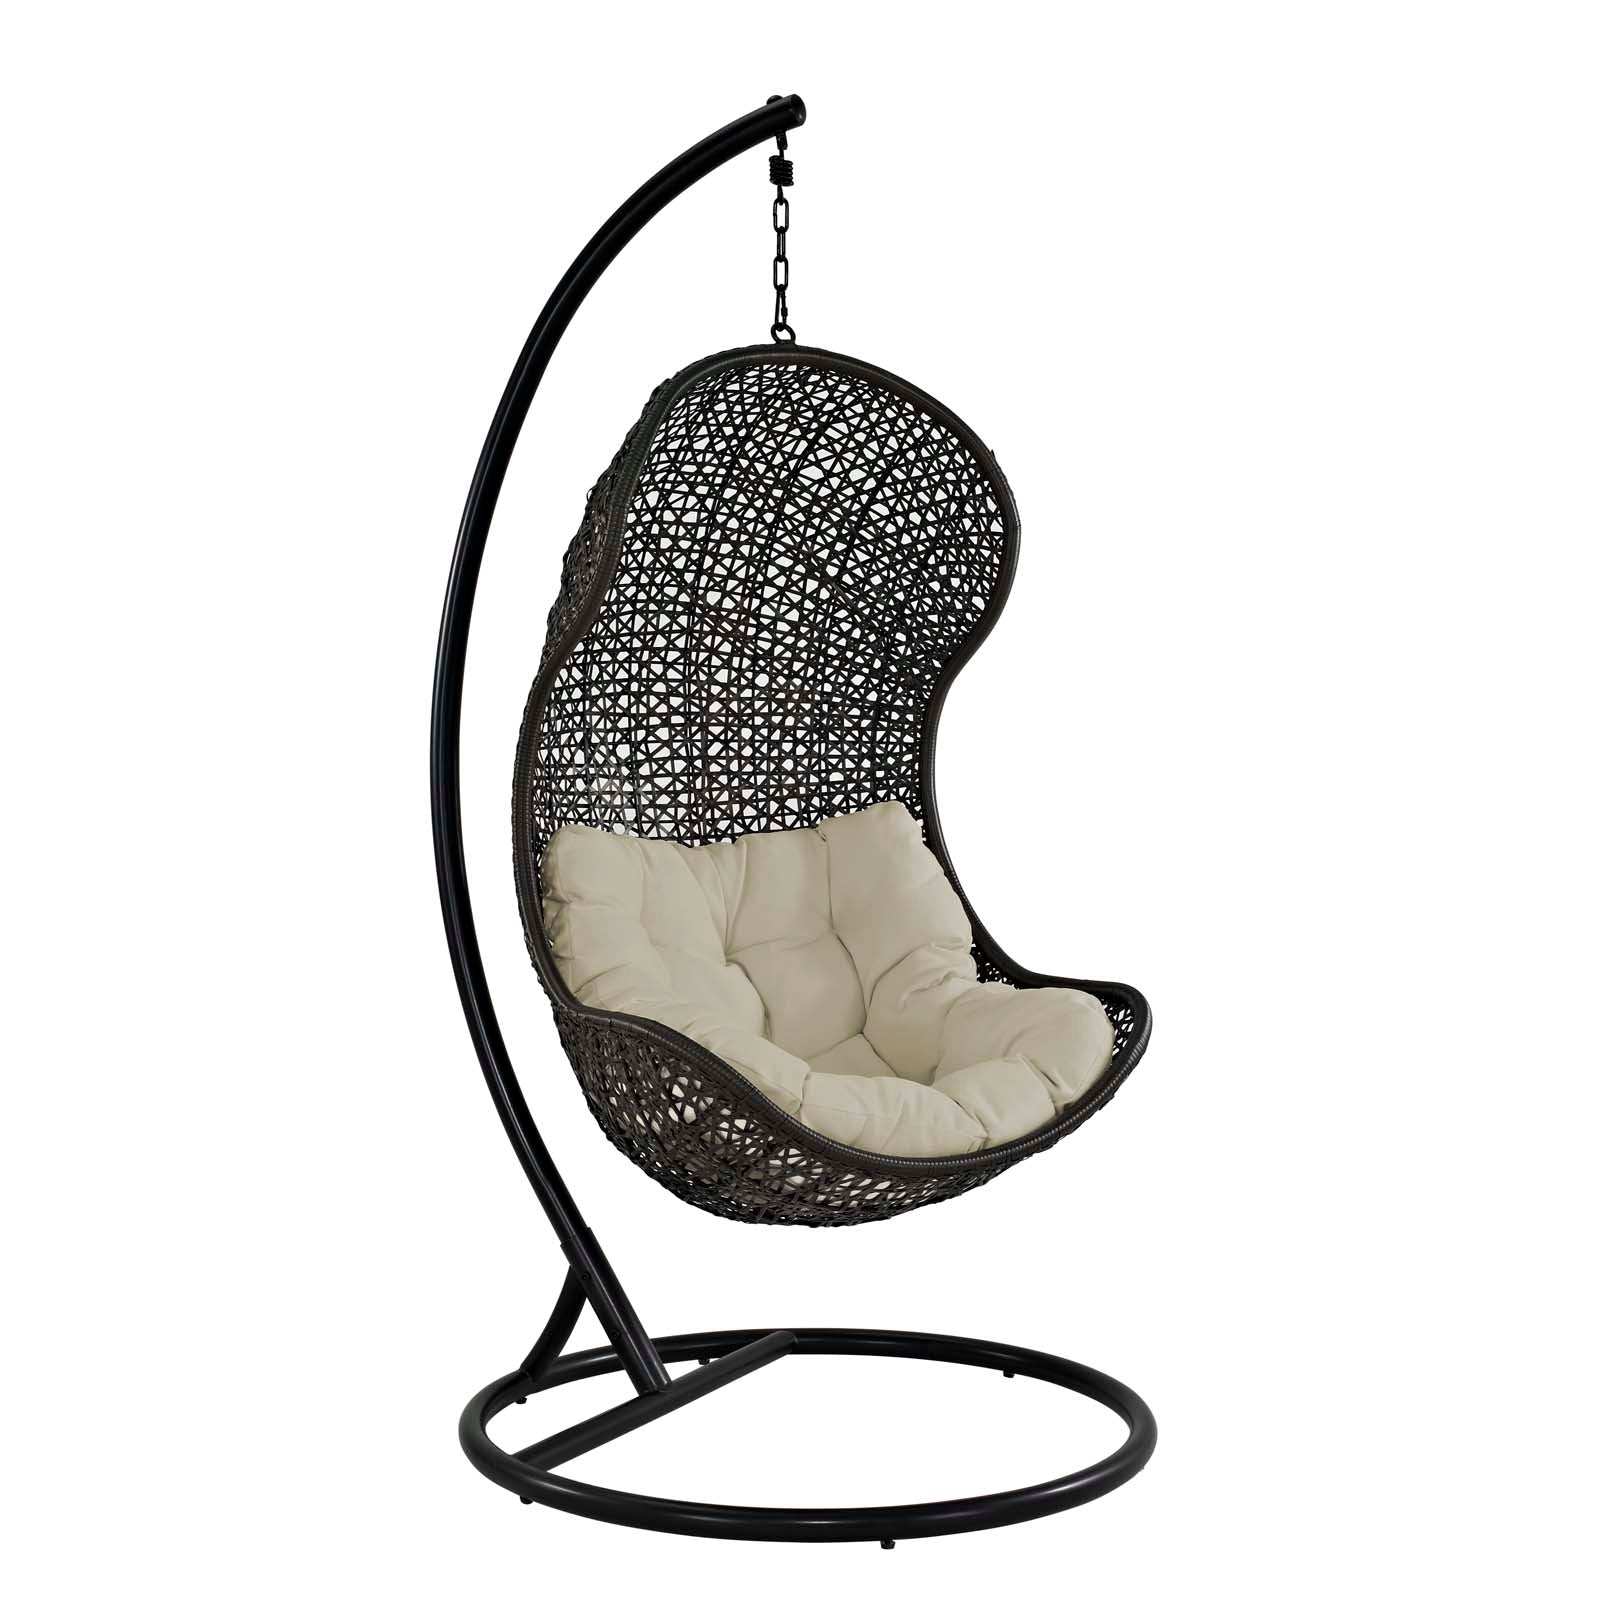 Fastness Hanging Chair with Comfortable Red Cushion - Parlay Outdoor Patio Fabric Swing Chair